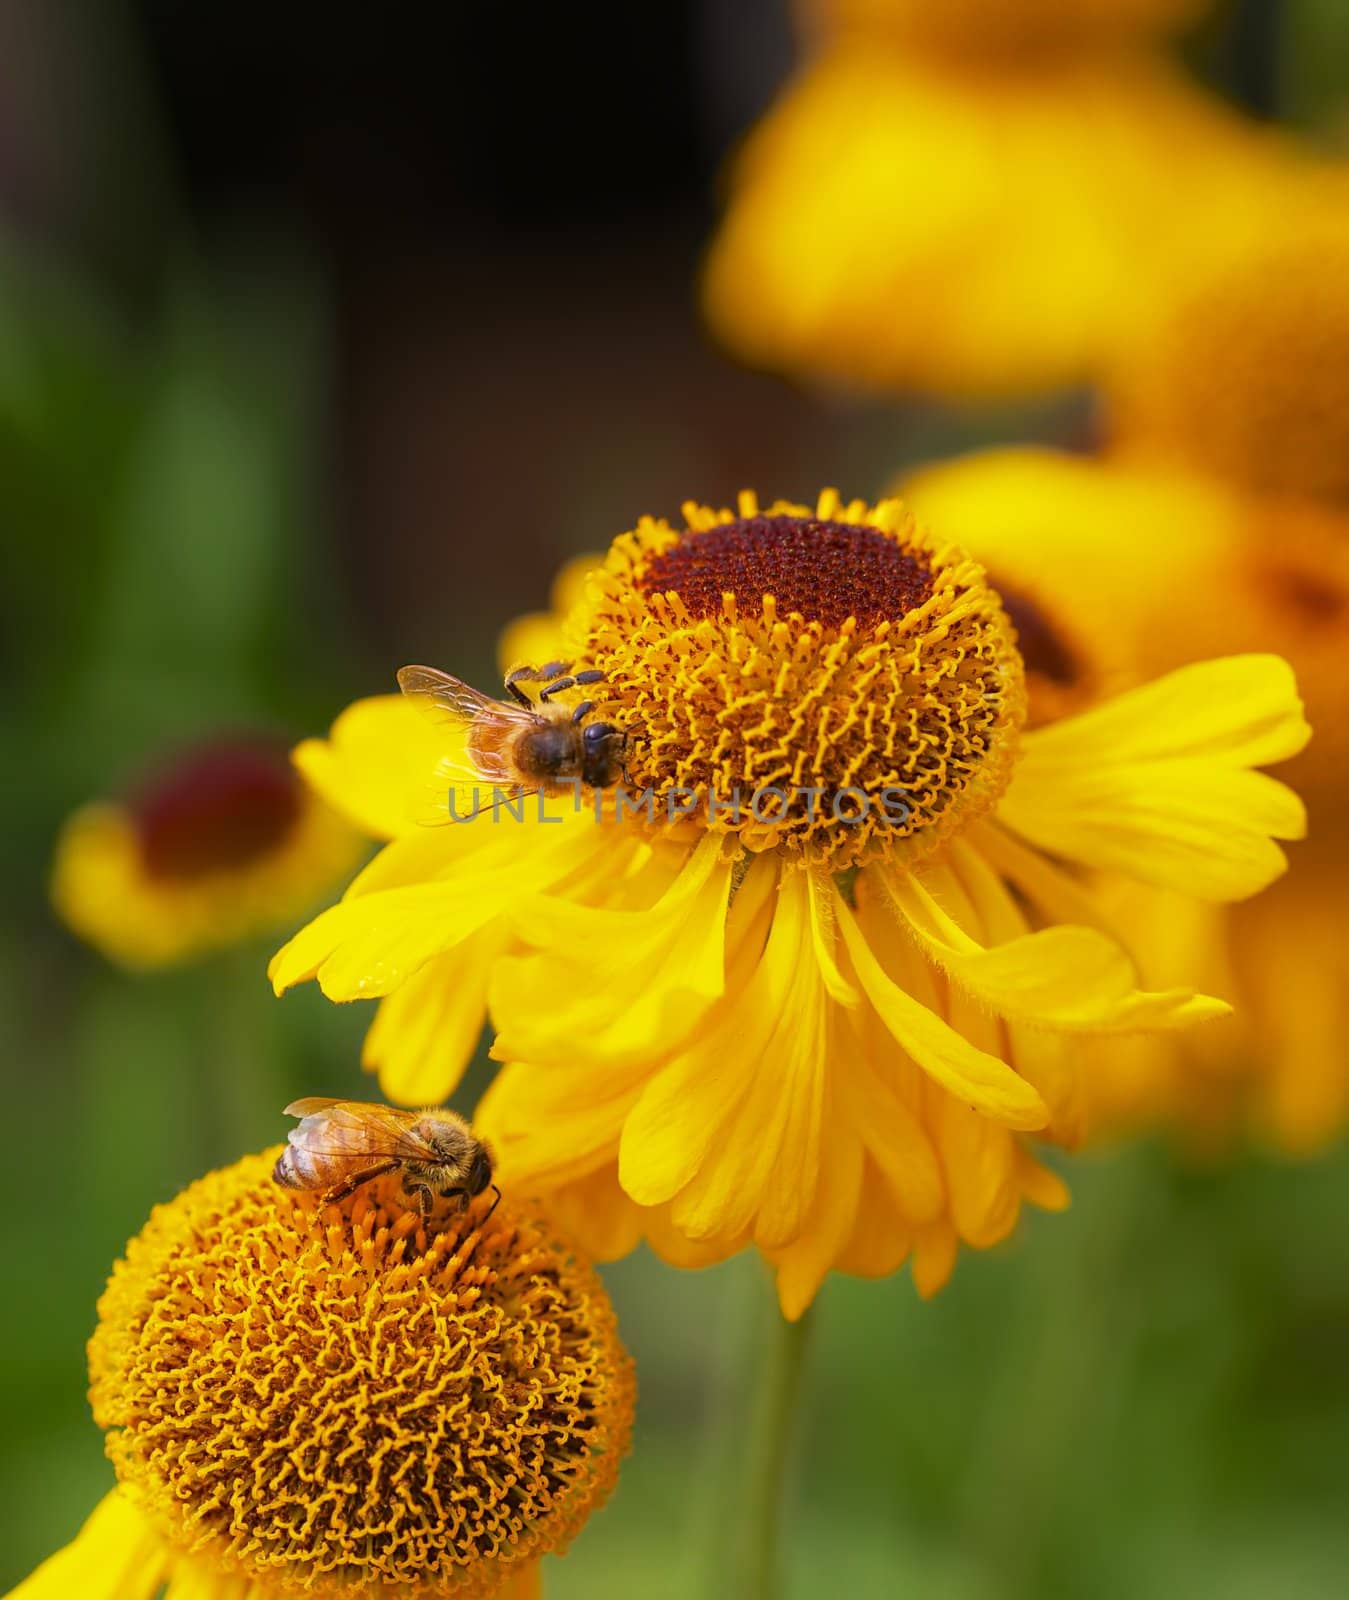 Honey Bees busy working on yellow cone flowers with very soft background